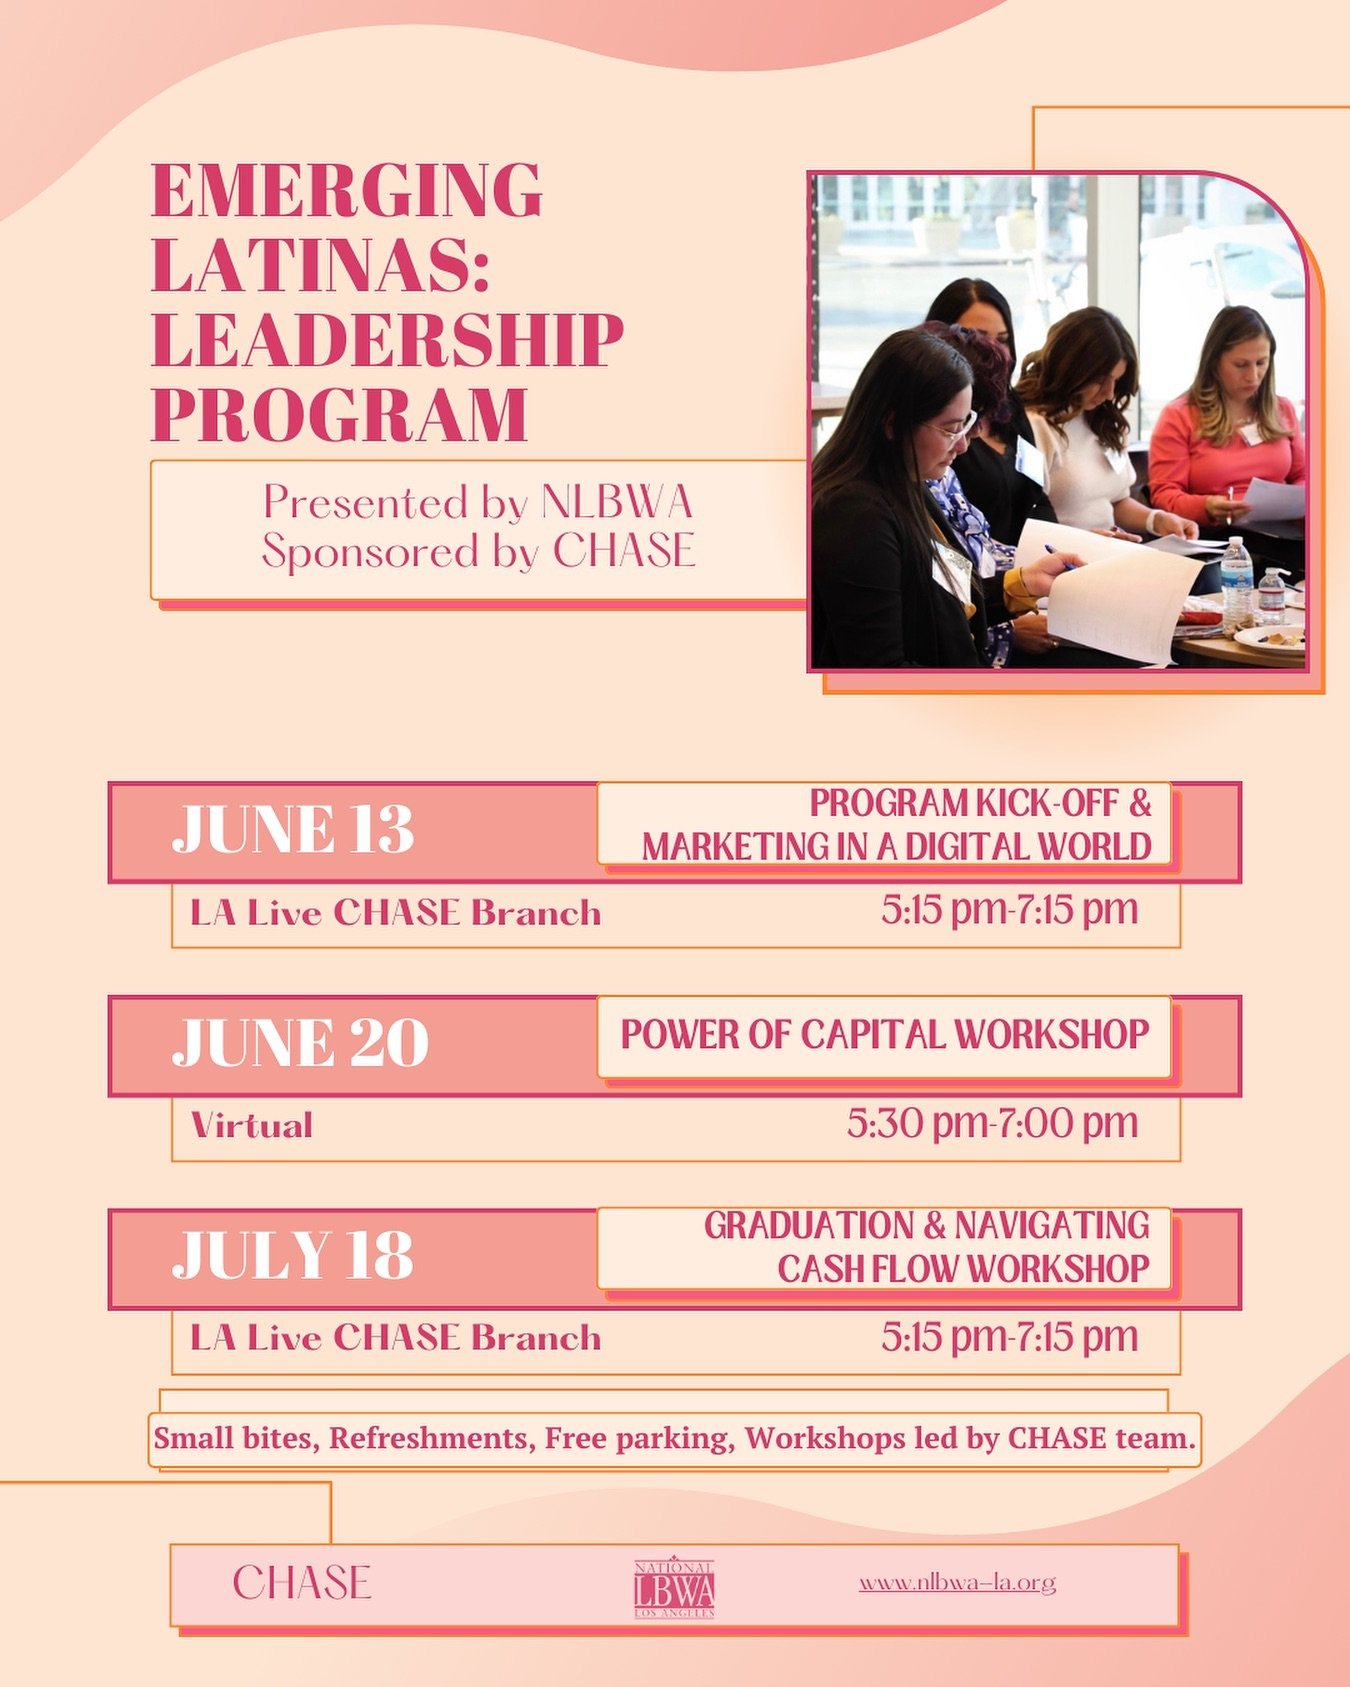 Elevate your leadership game!👏🏼 Join us for an empowering series of workshops in partnership with CHASE on self-development and leadership enhancement!🙌🏼

From perfecting your digital marketing to navigating cash flow challenges, our program has 